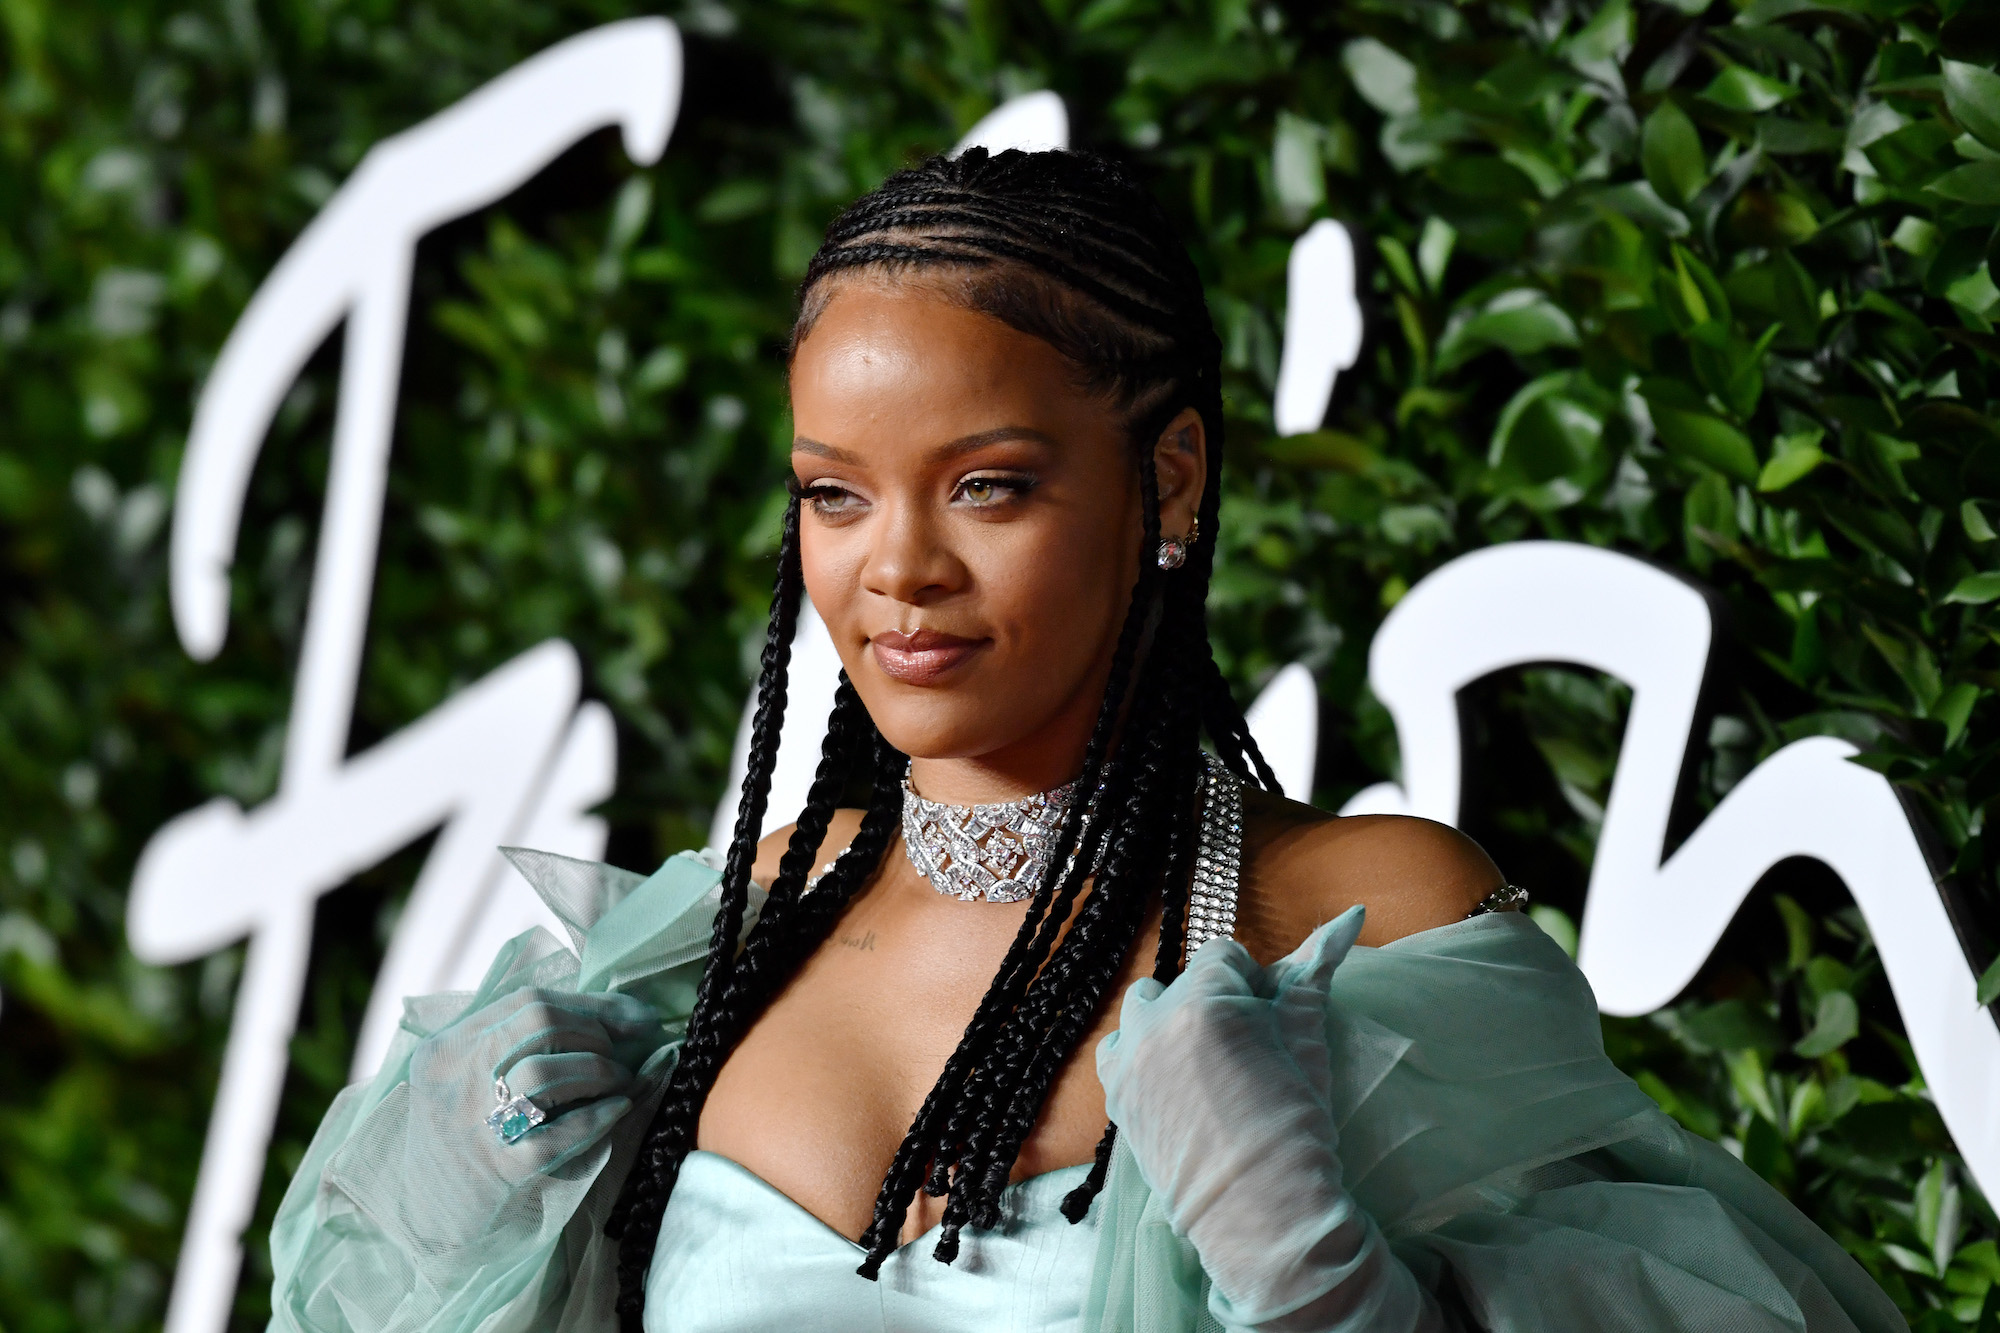 Rihanna Is Now Officially A Billionaire And World’s Richest Female Musician